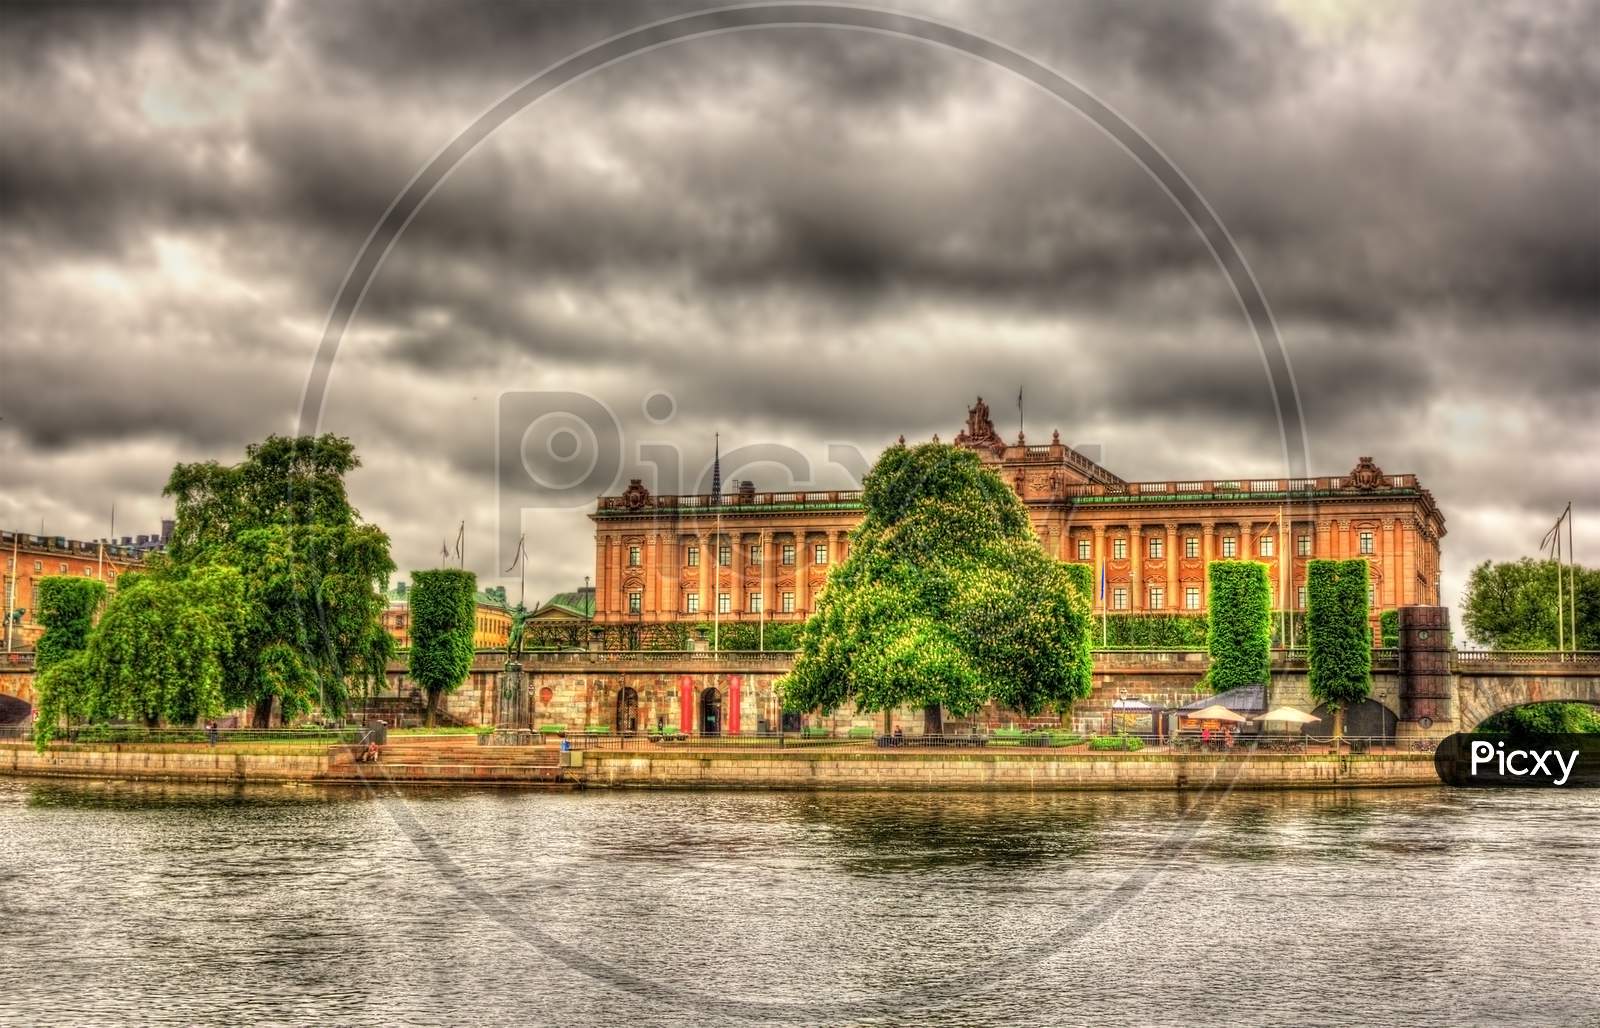 View Of The Parliament House In Stockholm, Sweden